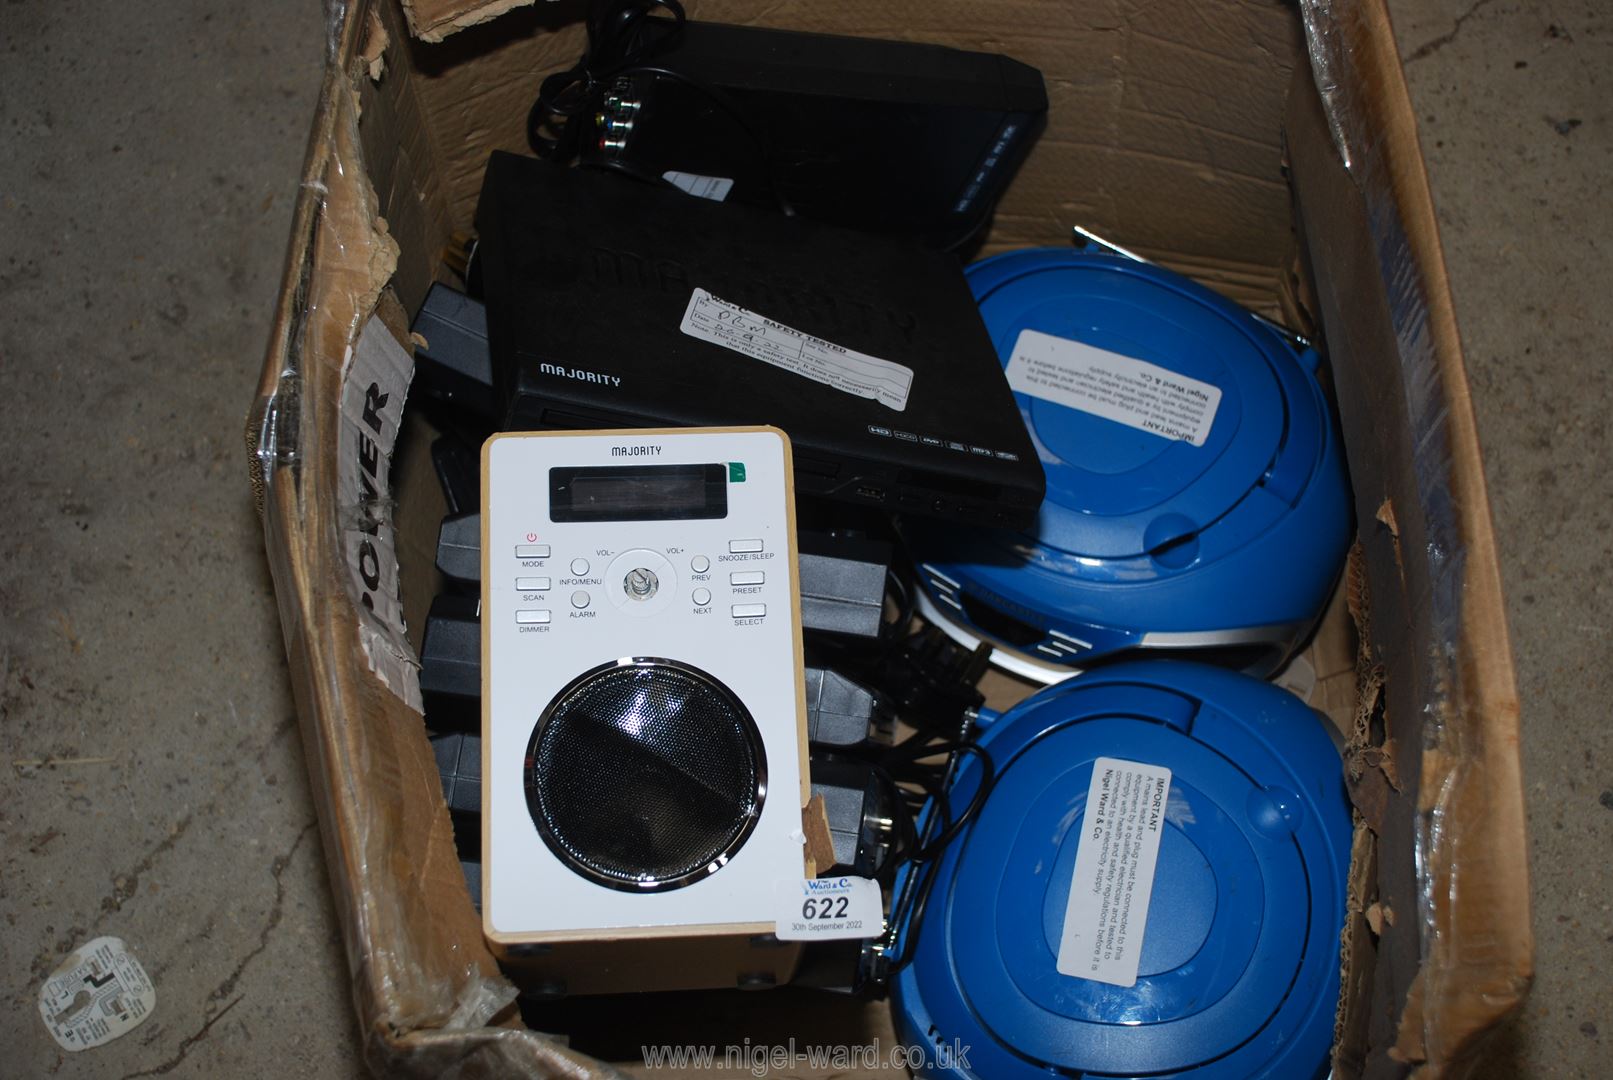 Two CD players, digital radio a/f. and 7 DVD players.